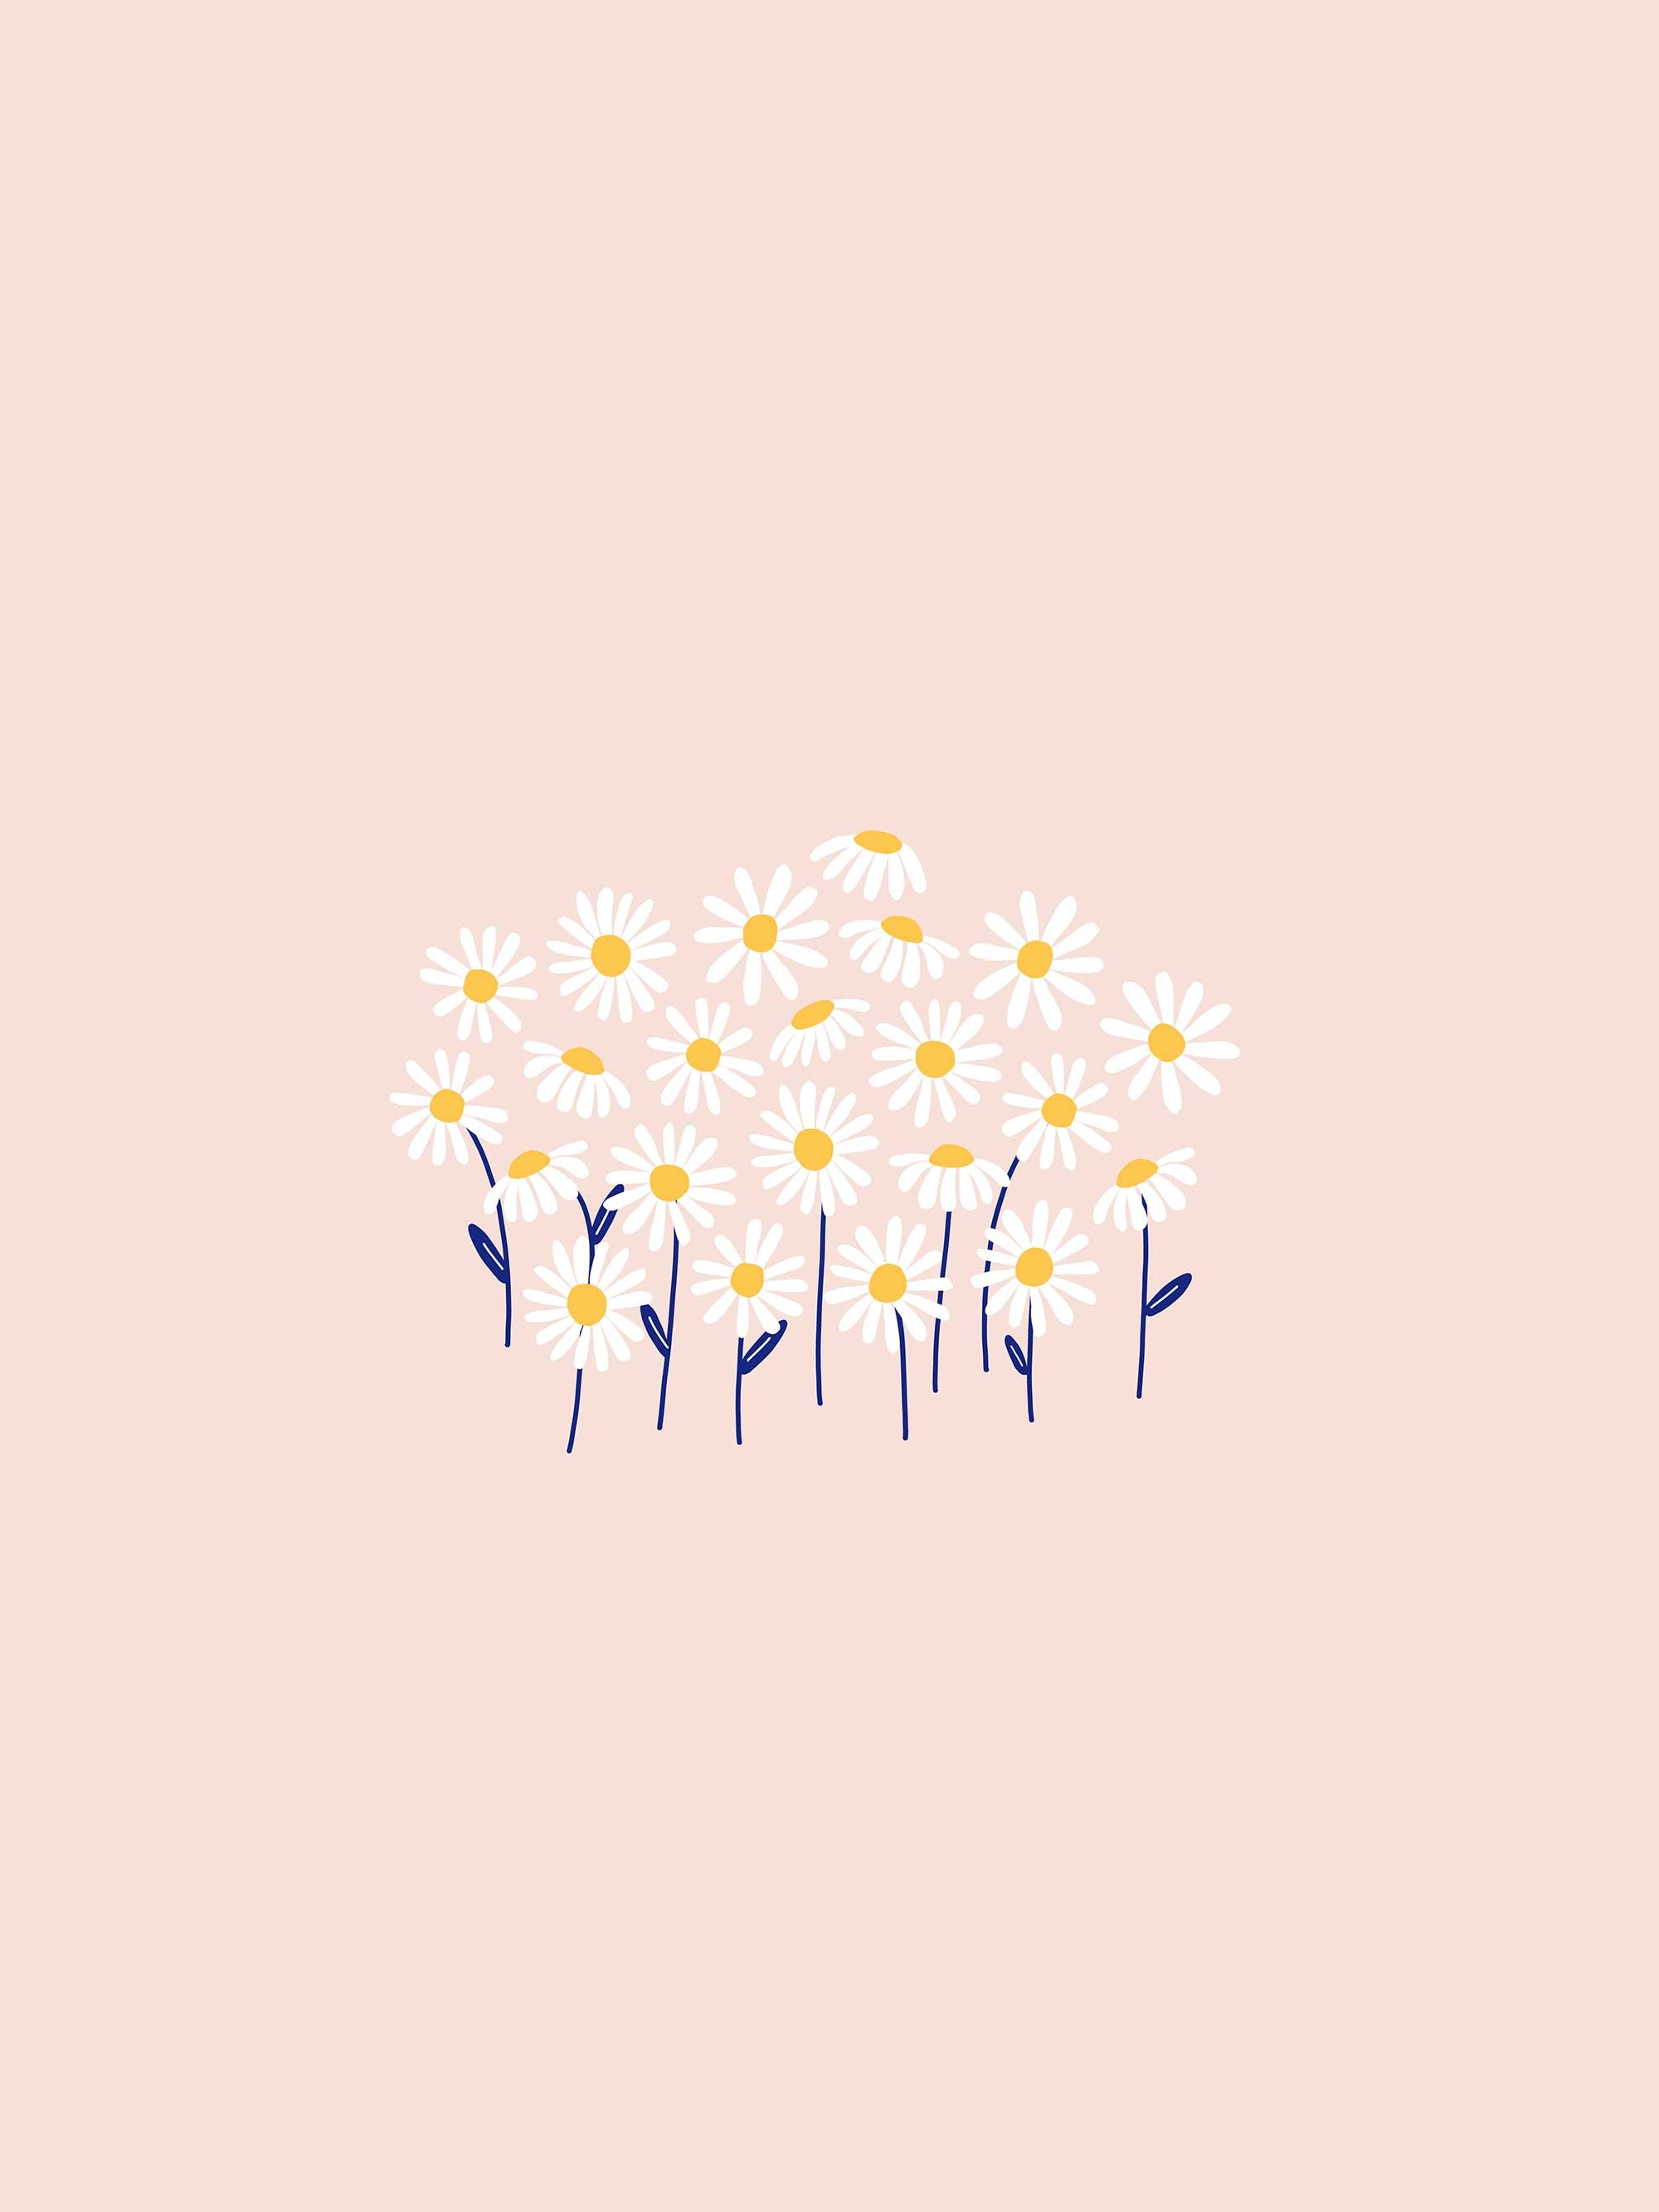 Aesthetic phone background of daisies on a pink background - Pastel minimalist